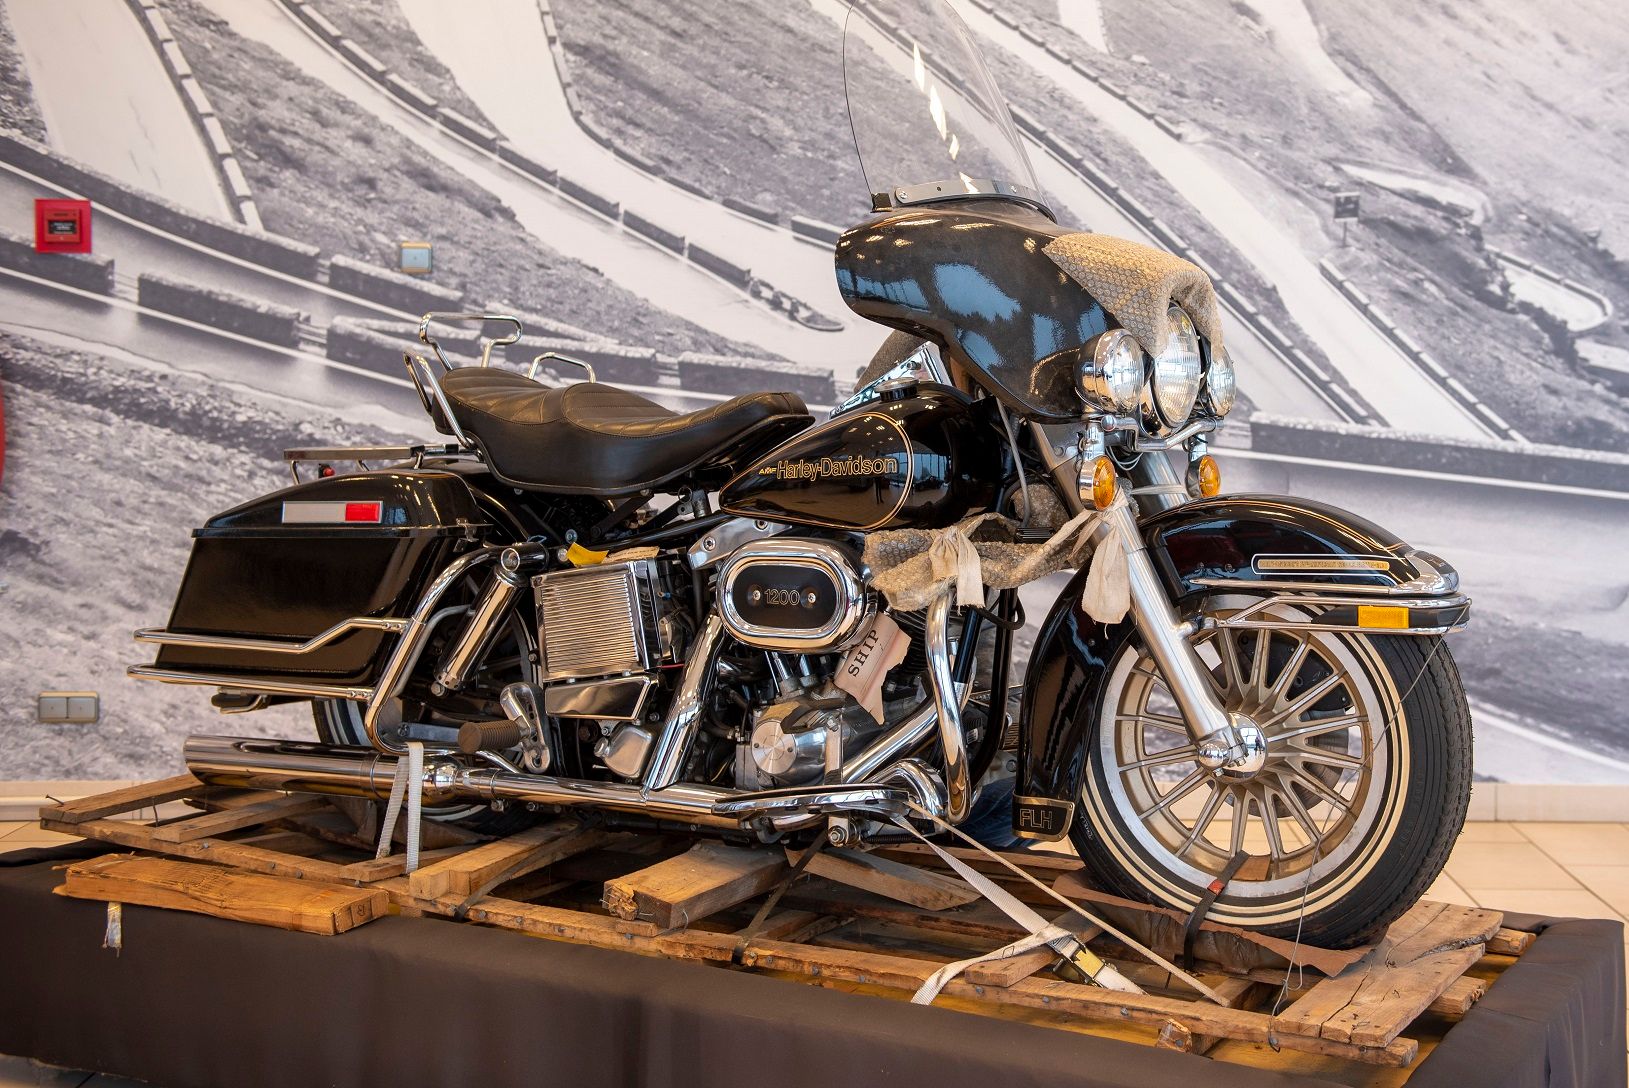 Unboxed 1978 Harley-Davidson Electra Glide_Artcurial Motorcars Auction_05